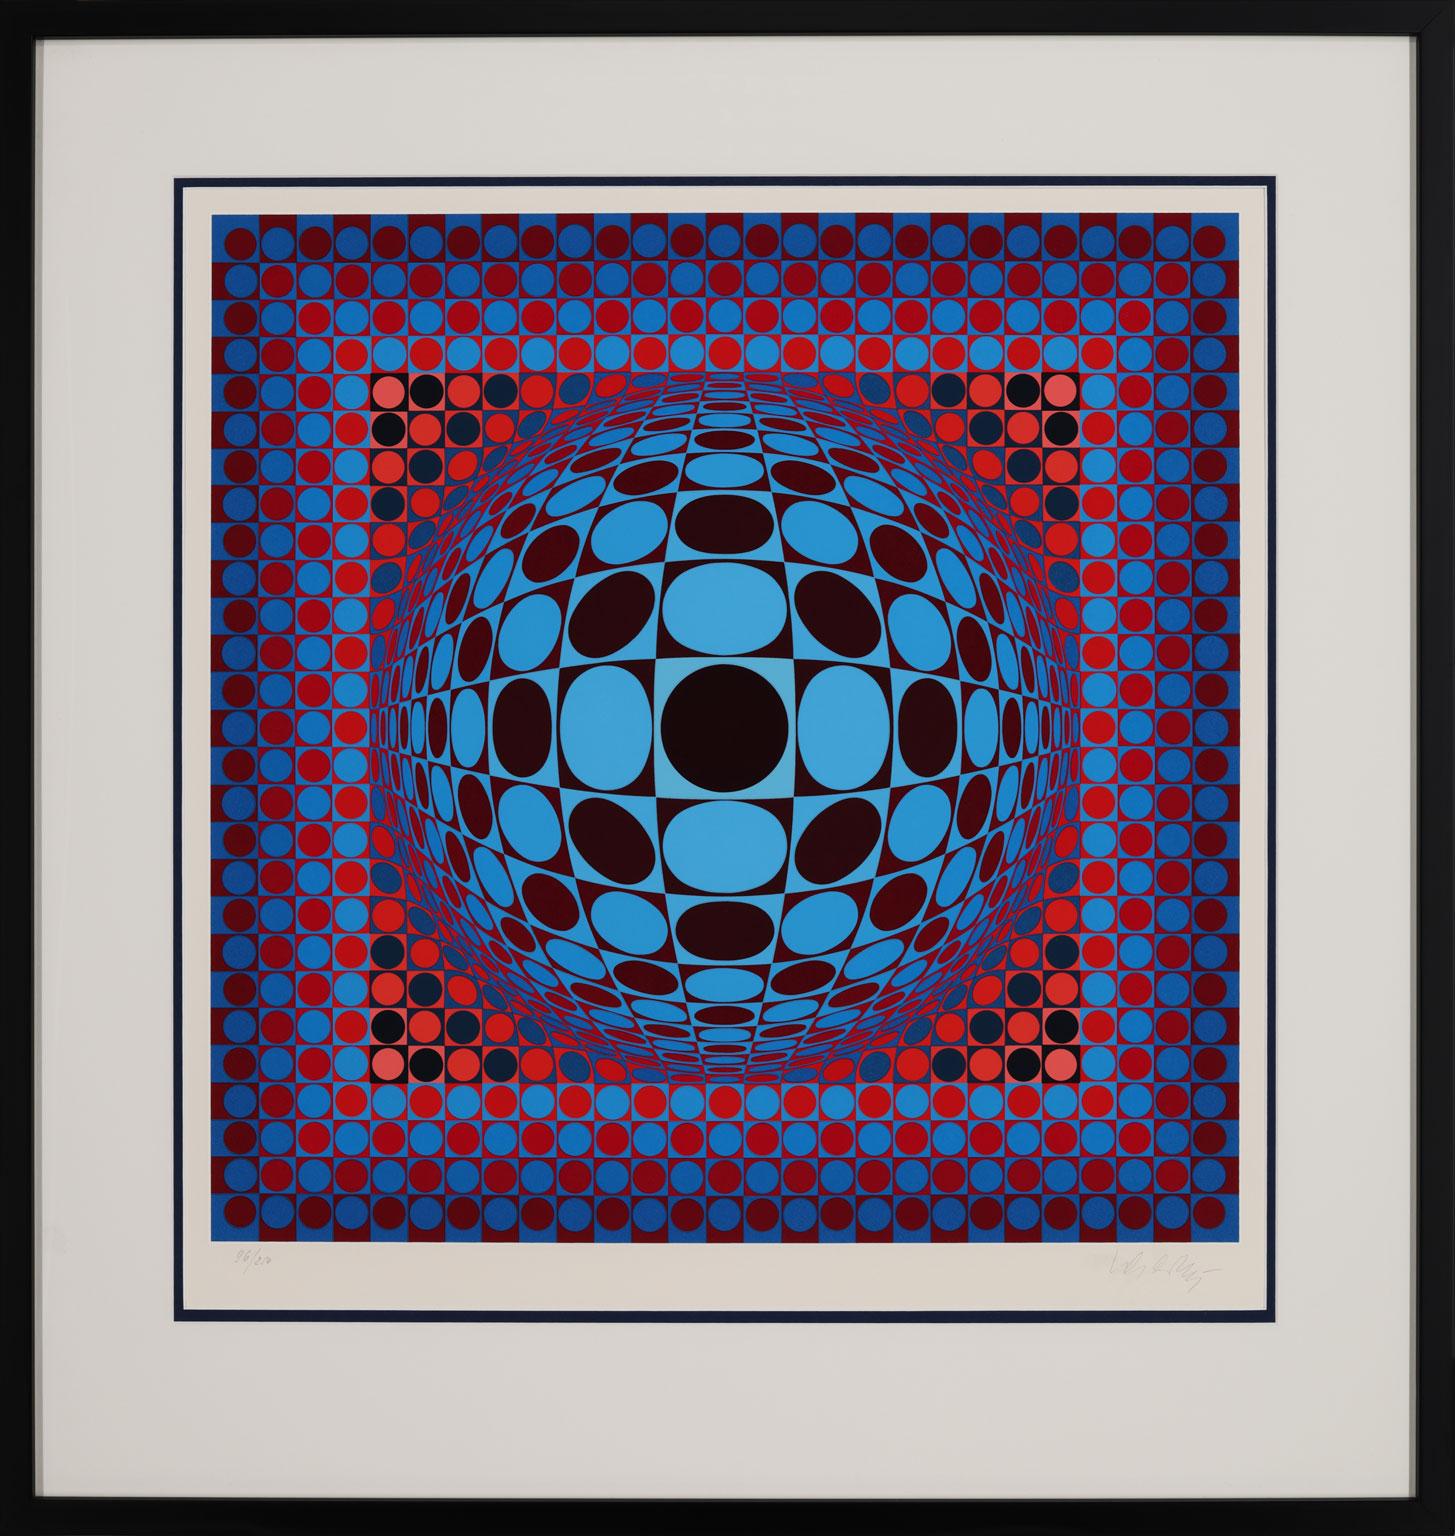 "Hang," an original serigraph by Victor Vasarely, is a piece for the true collector. Vasarely is considered the father of the Op-Art movement and developed an iconic style that is recognizable across the globe and has been widely collected for eight